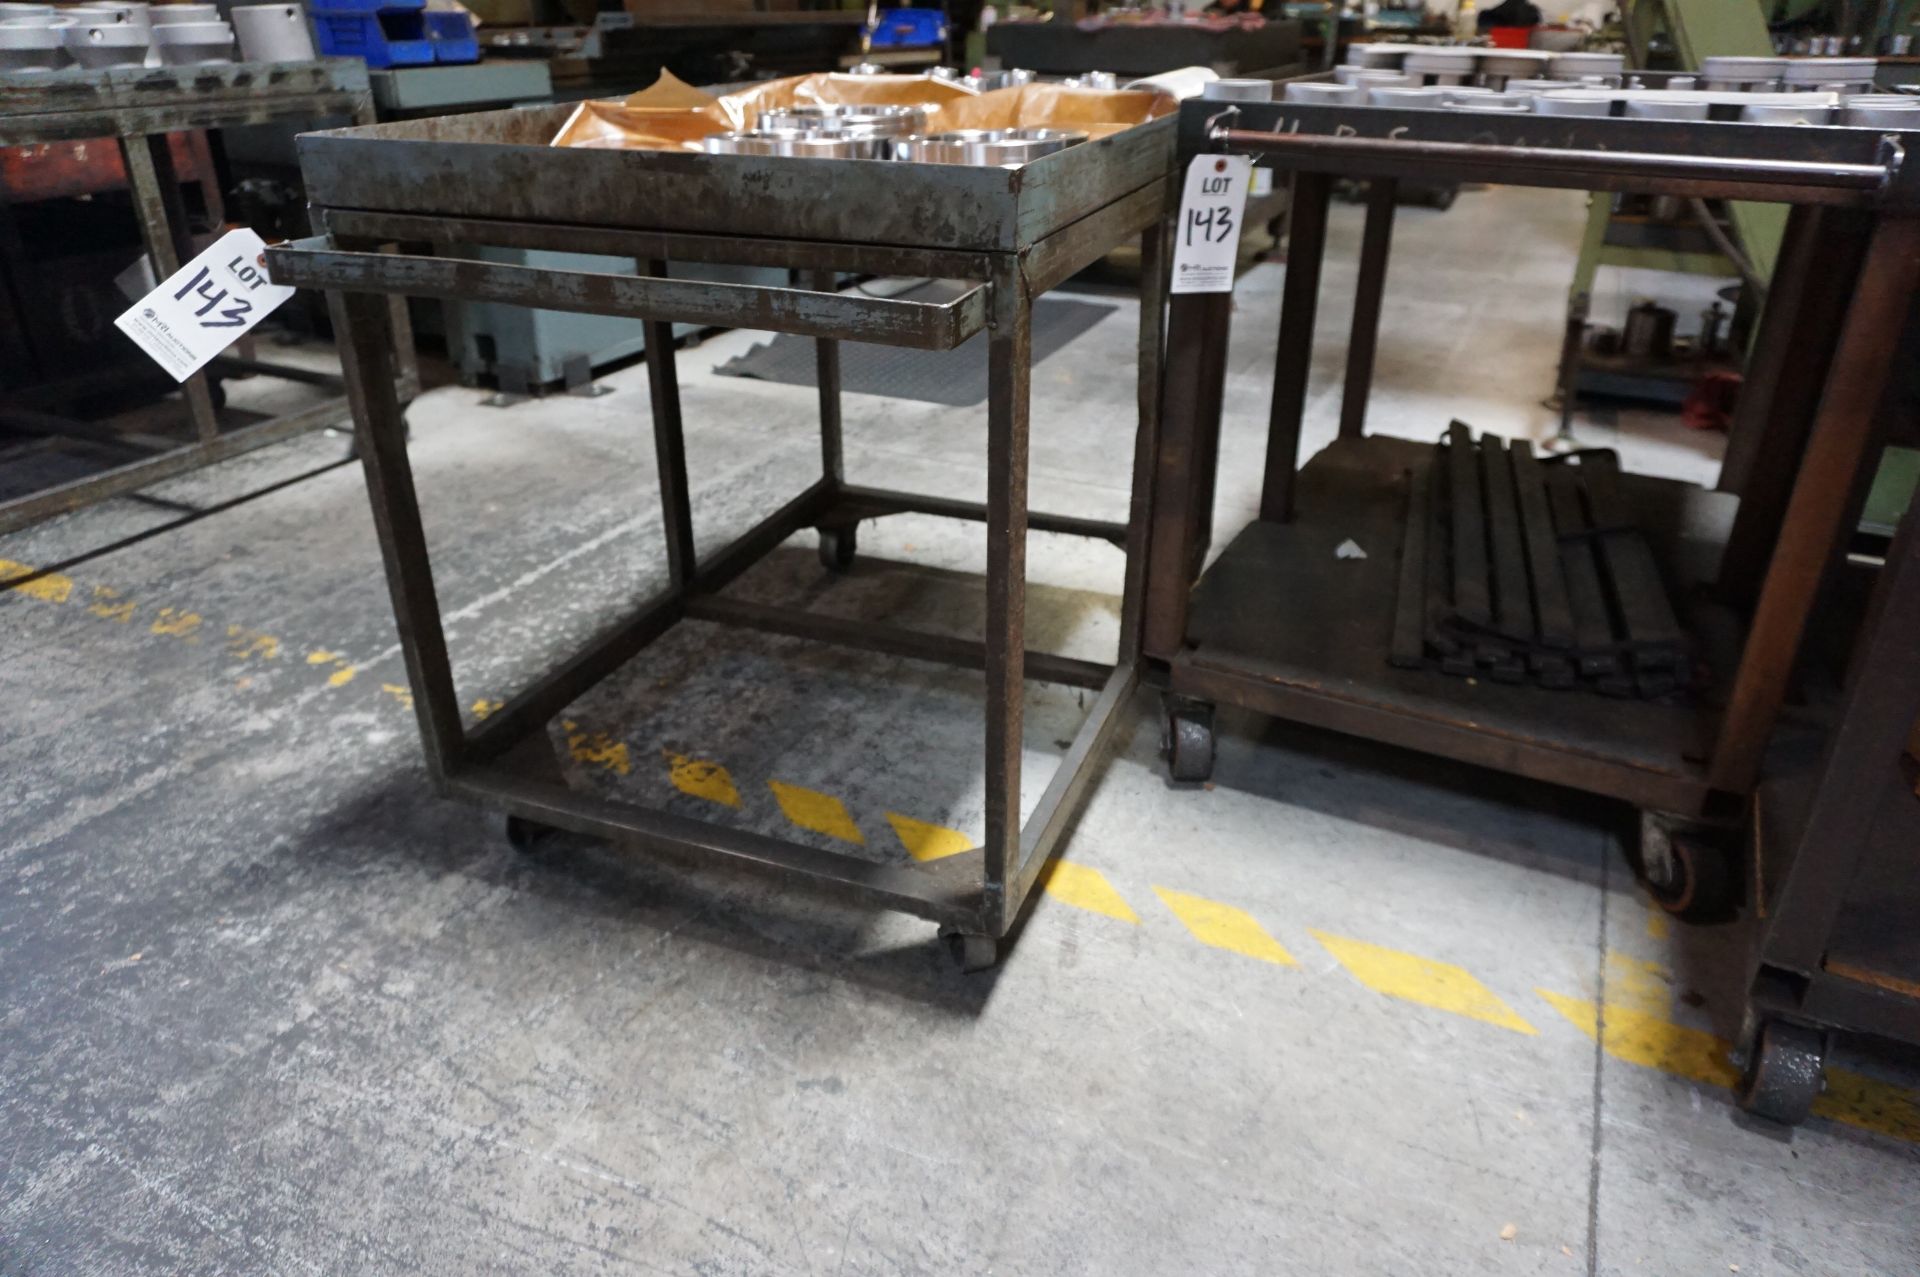 (3) STEEL SHOP CARTS *NO CONTENTS CARTS ONLY* - Image 2 of 2